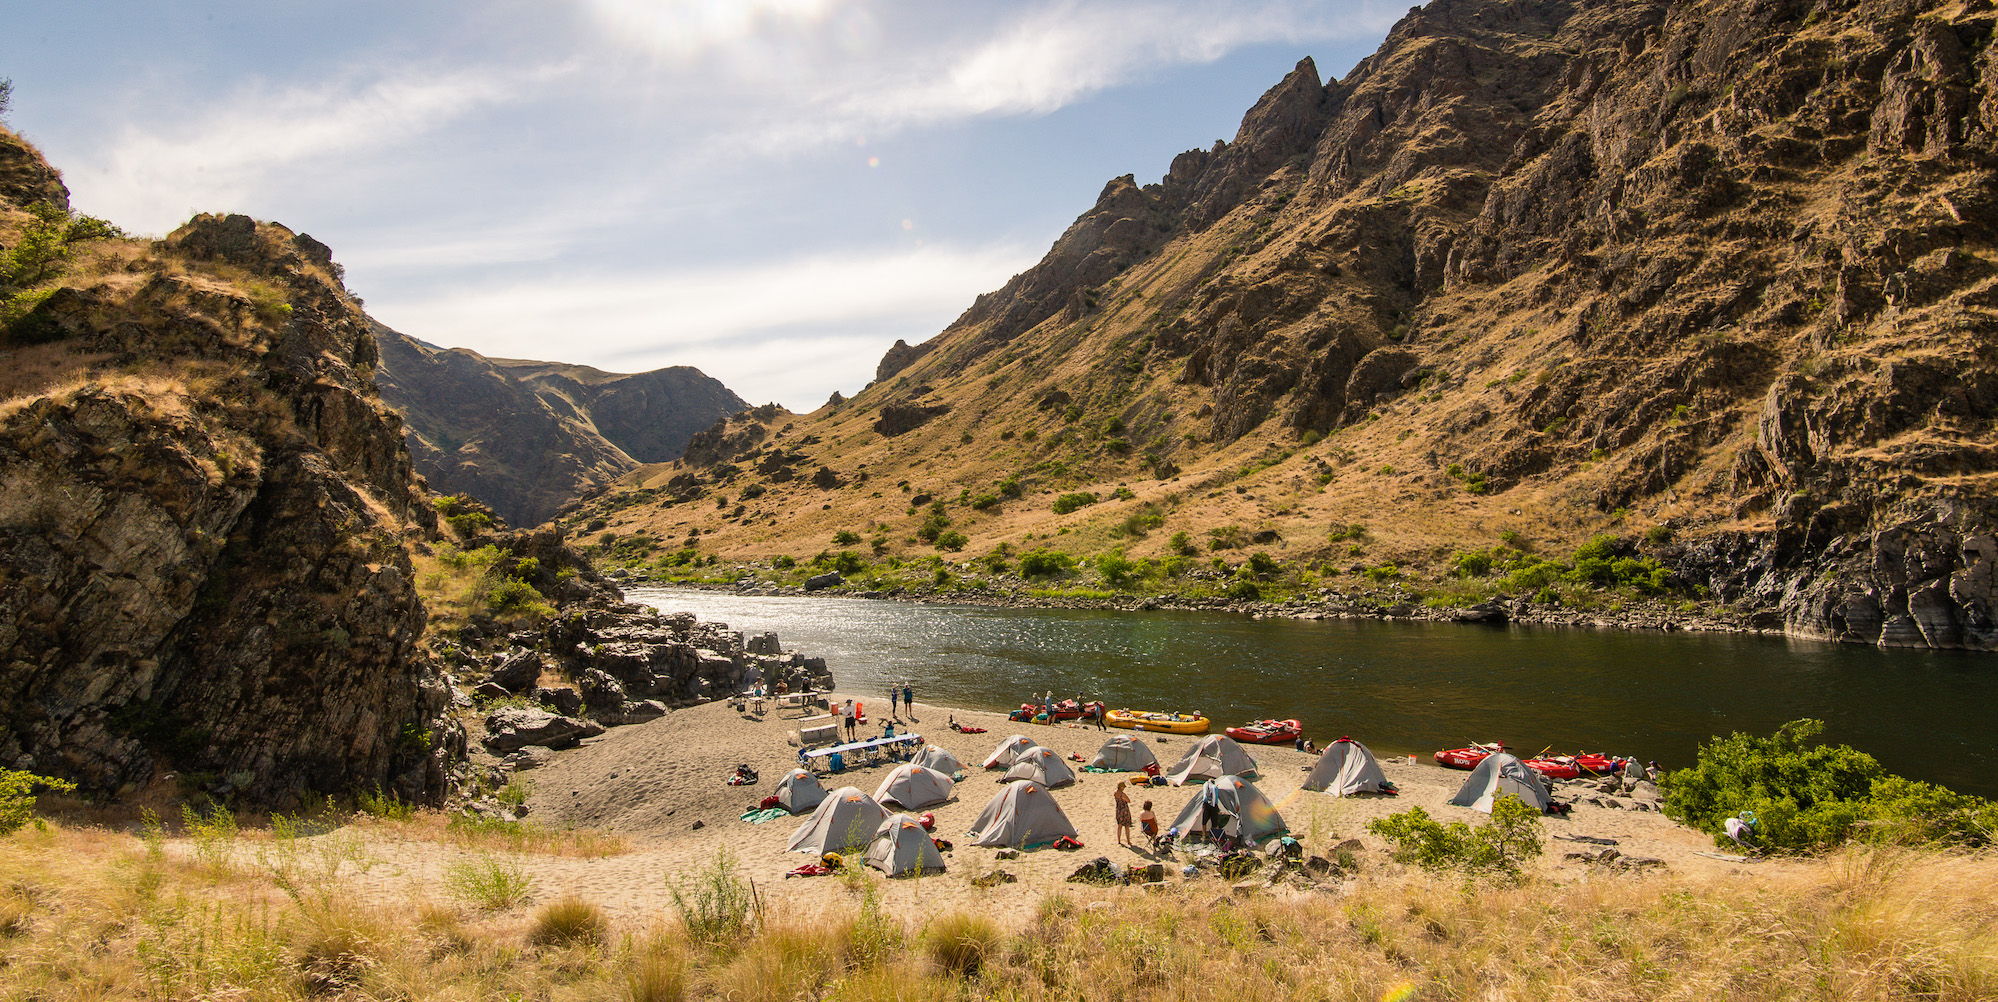 Tents sprawled on a wide sand beach along the Snake River through Hells Canyon